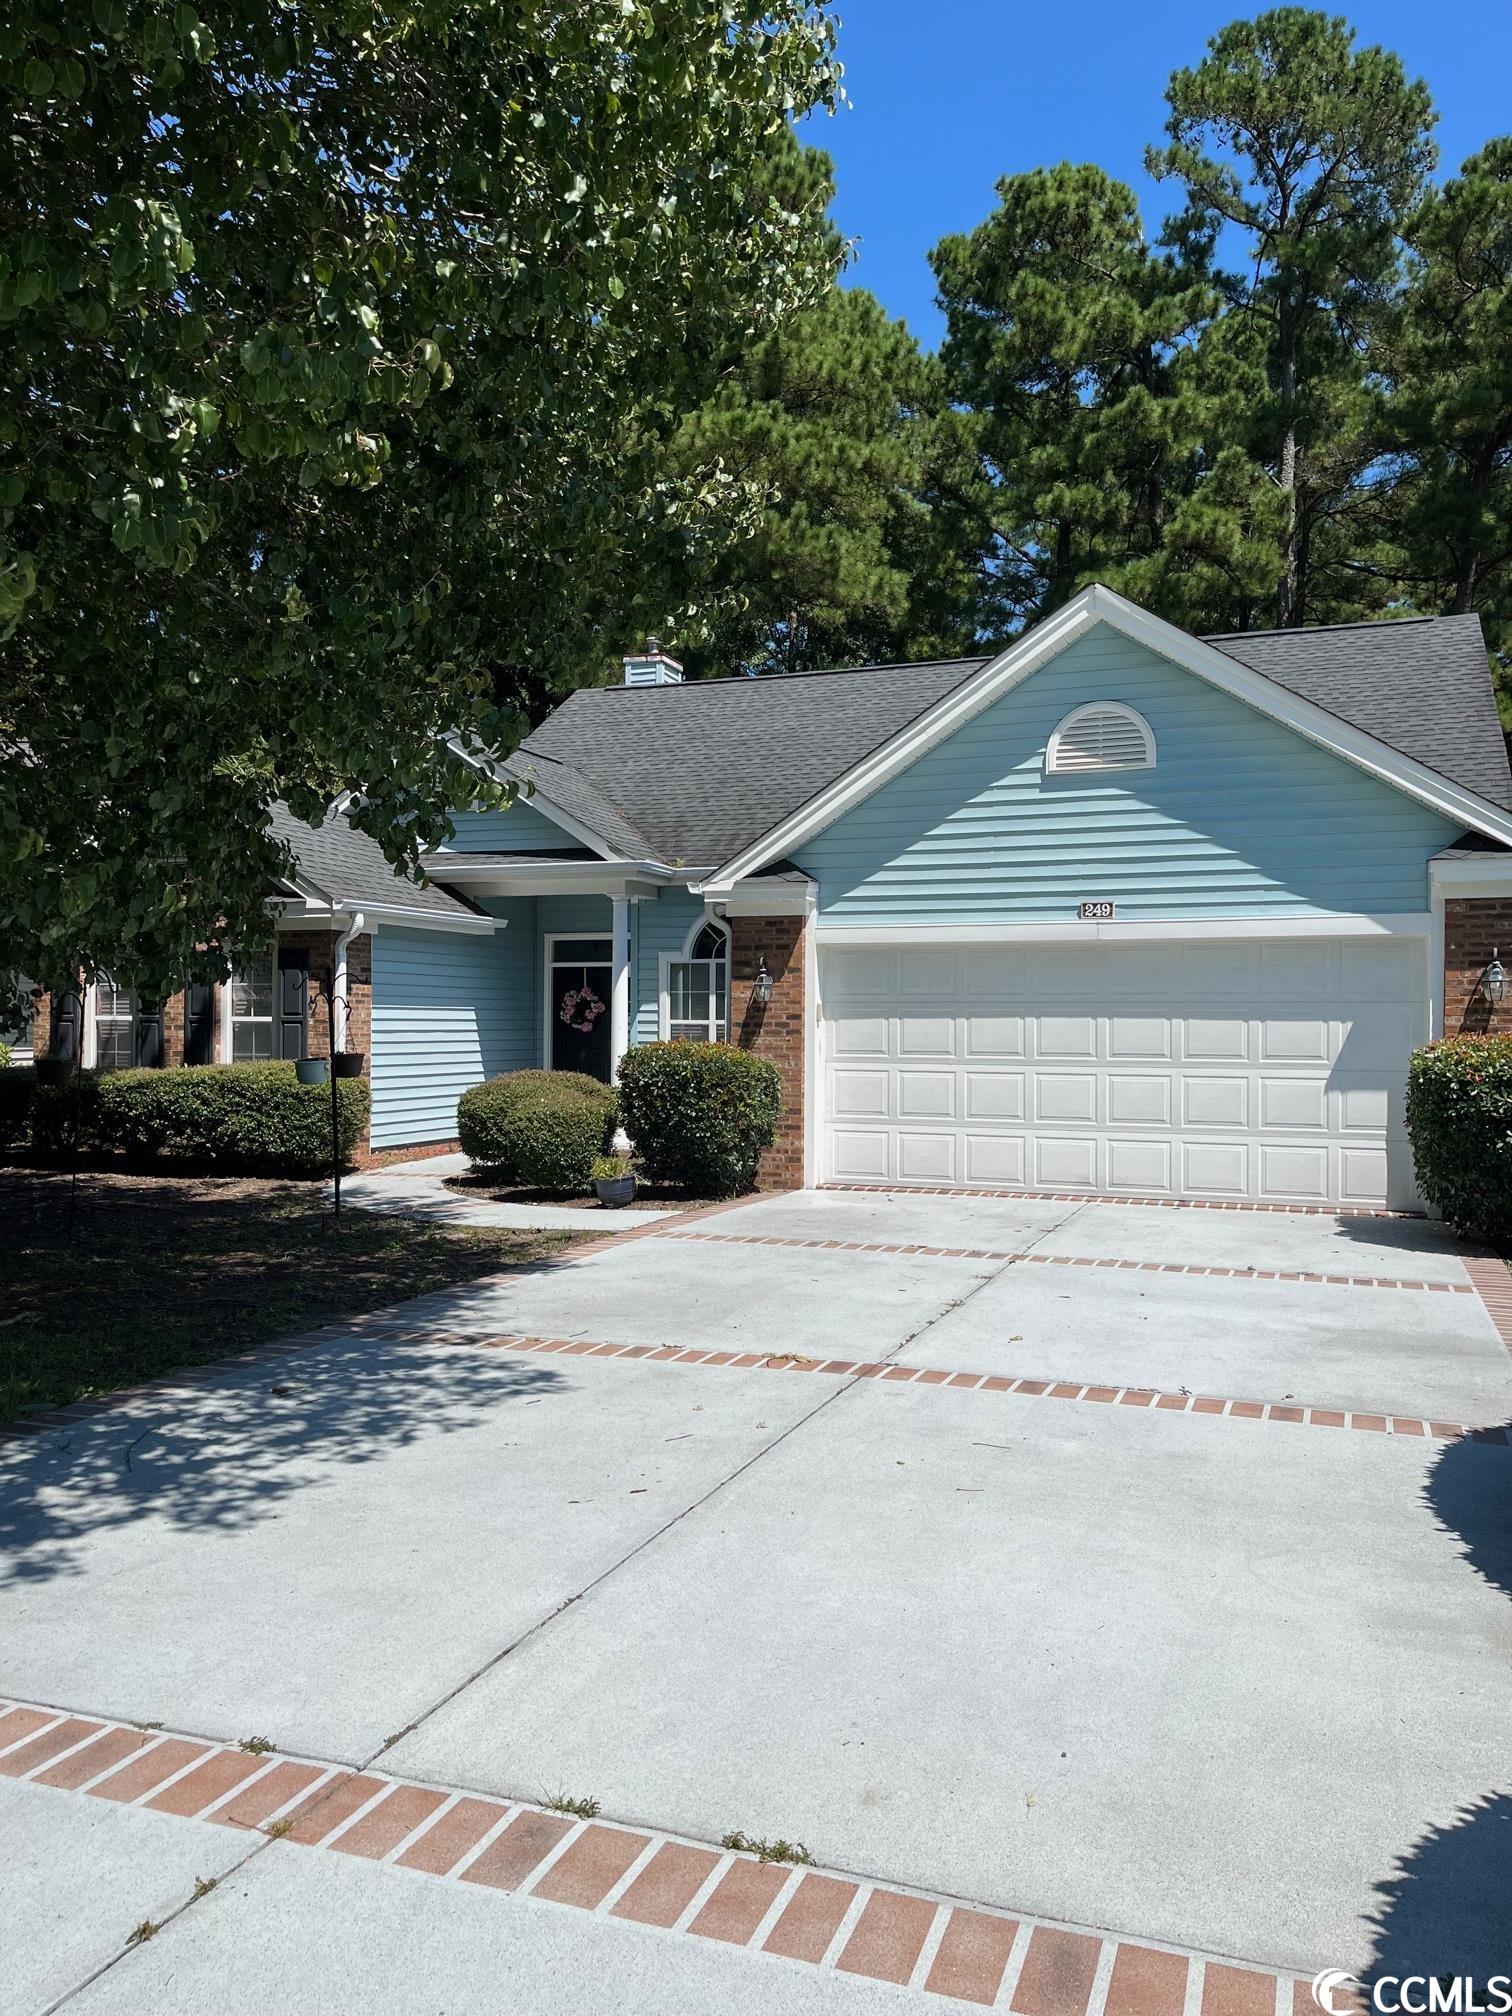 this 3 br/2 ba home is located on a large cul de sac on a quiet street in an active 55+ community with amenities including a pool, clubhouse, bocce ball court and more!  near conway hospital, shopping, restaurants and 10+ miles to the beach.  several golf courses in short driving distance.